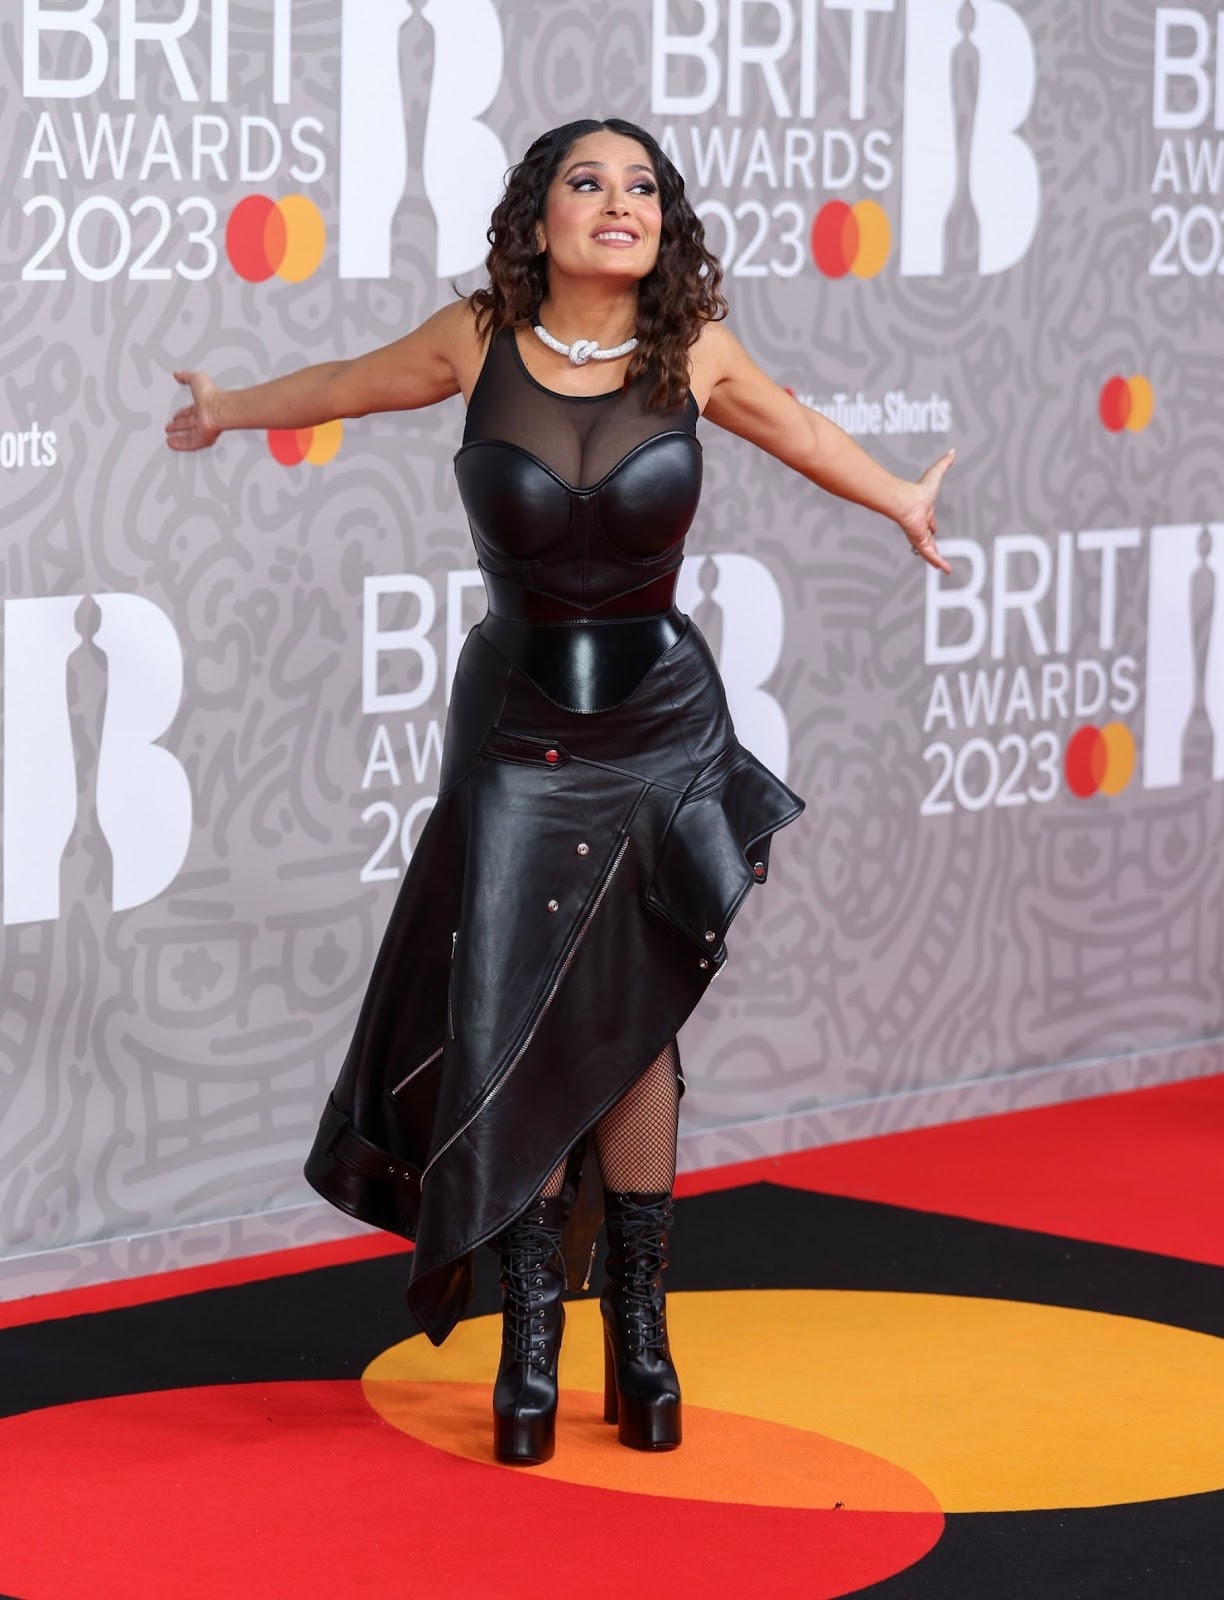 Salma Hayek attends The BRIT Awards 2023 at The O2 Arena on February 11, 2023 in London